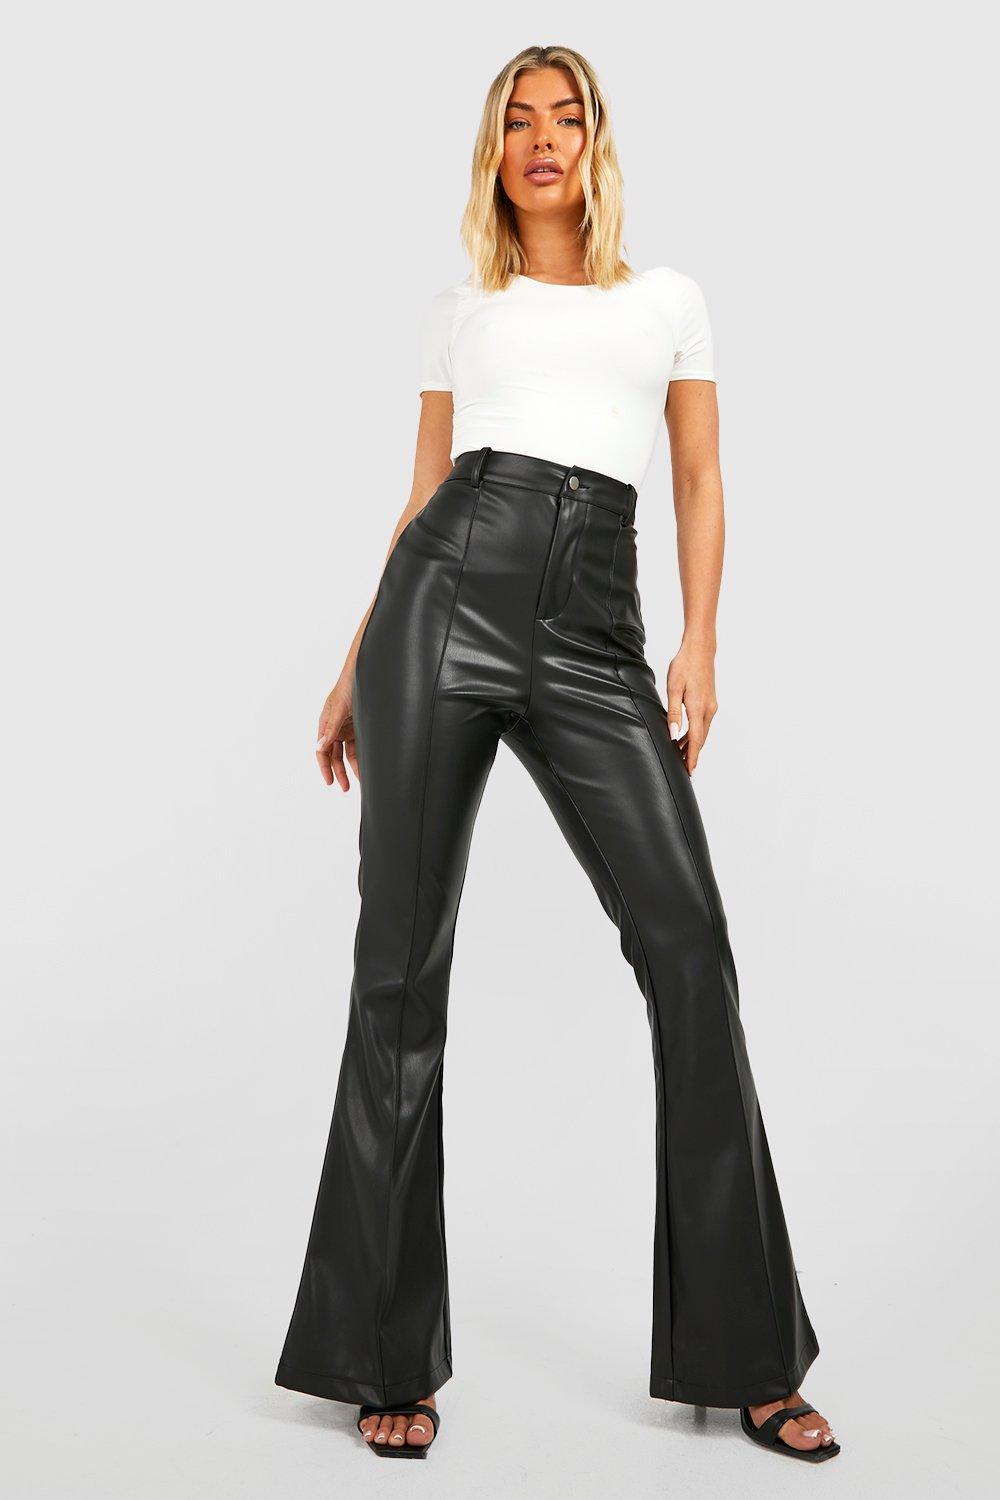 Womens Leather Look Tailored High Waisted Flared Trousers - Black - 6, Black